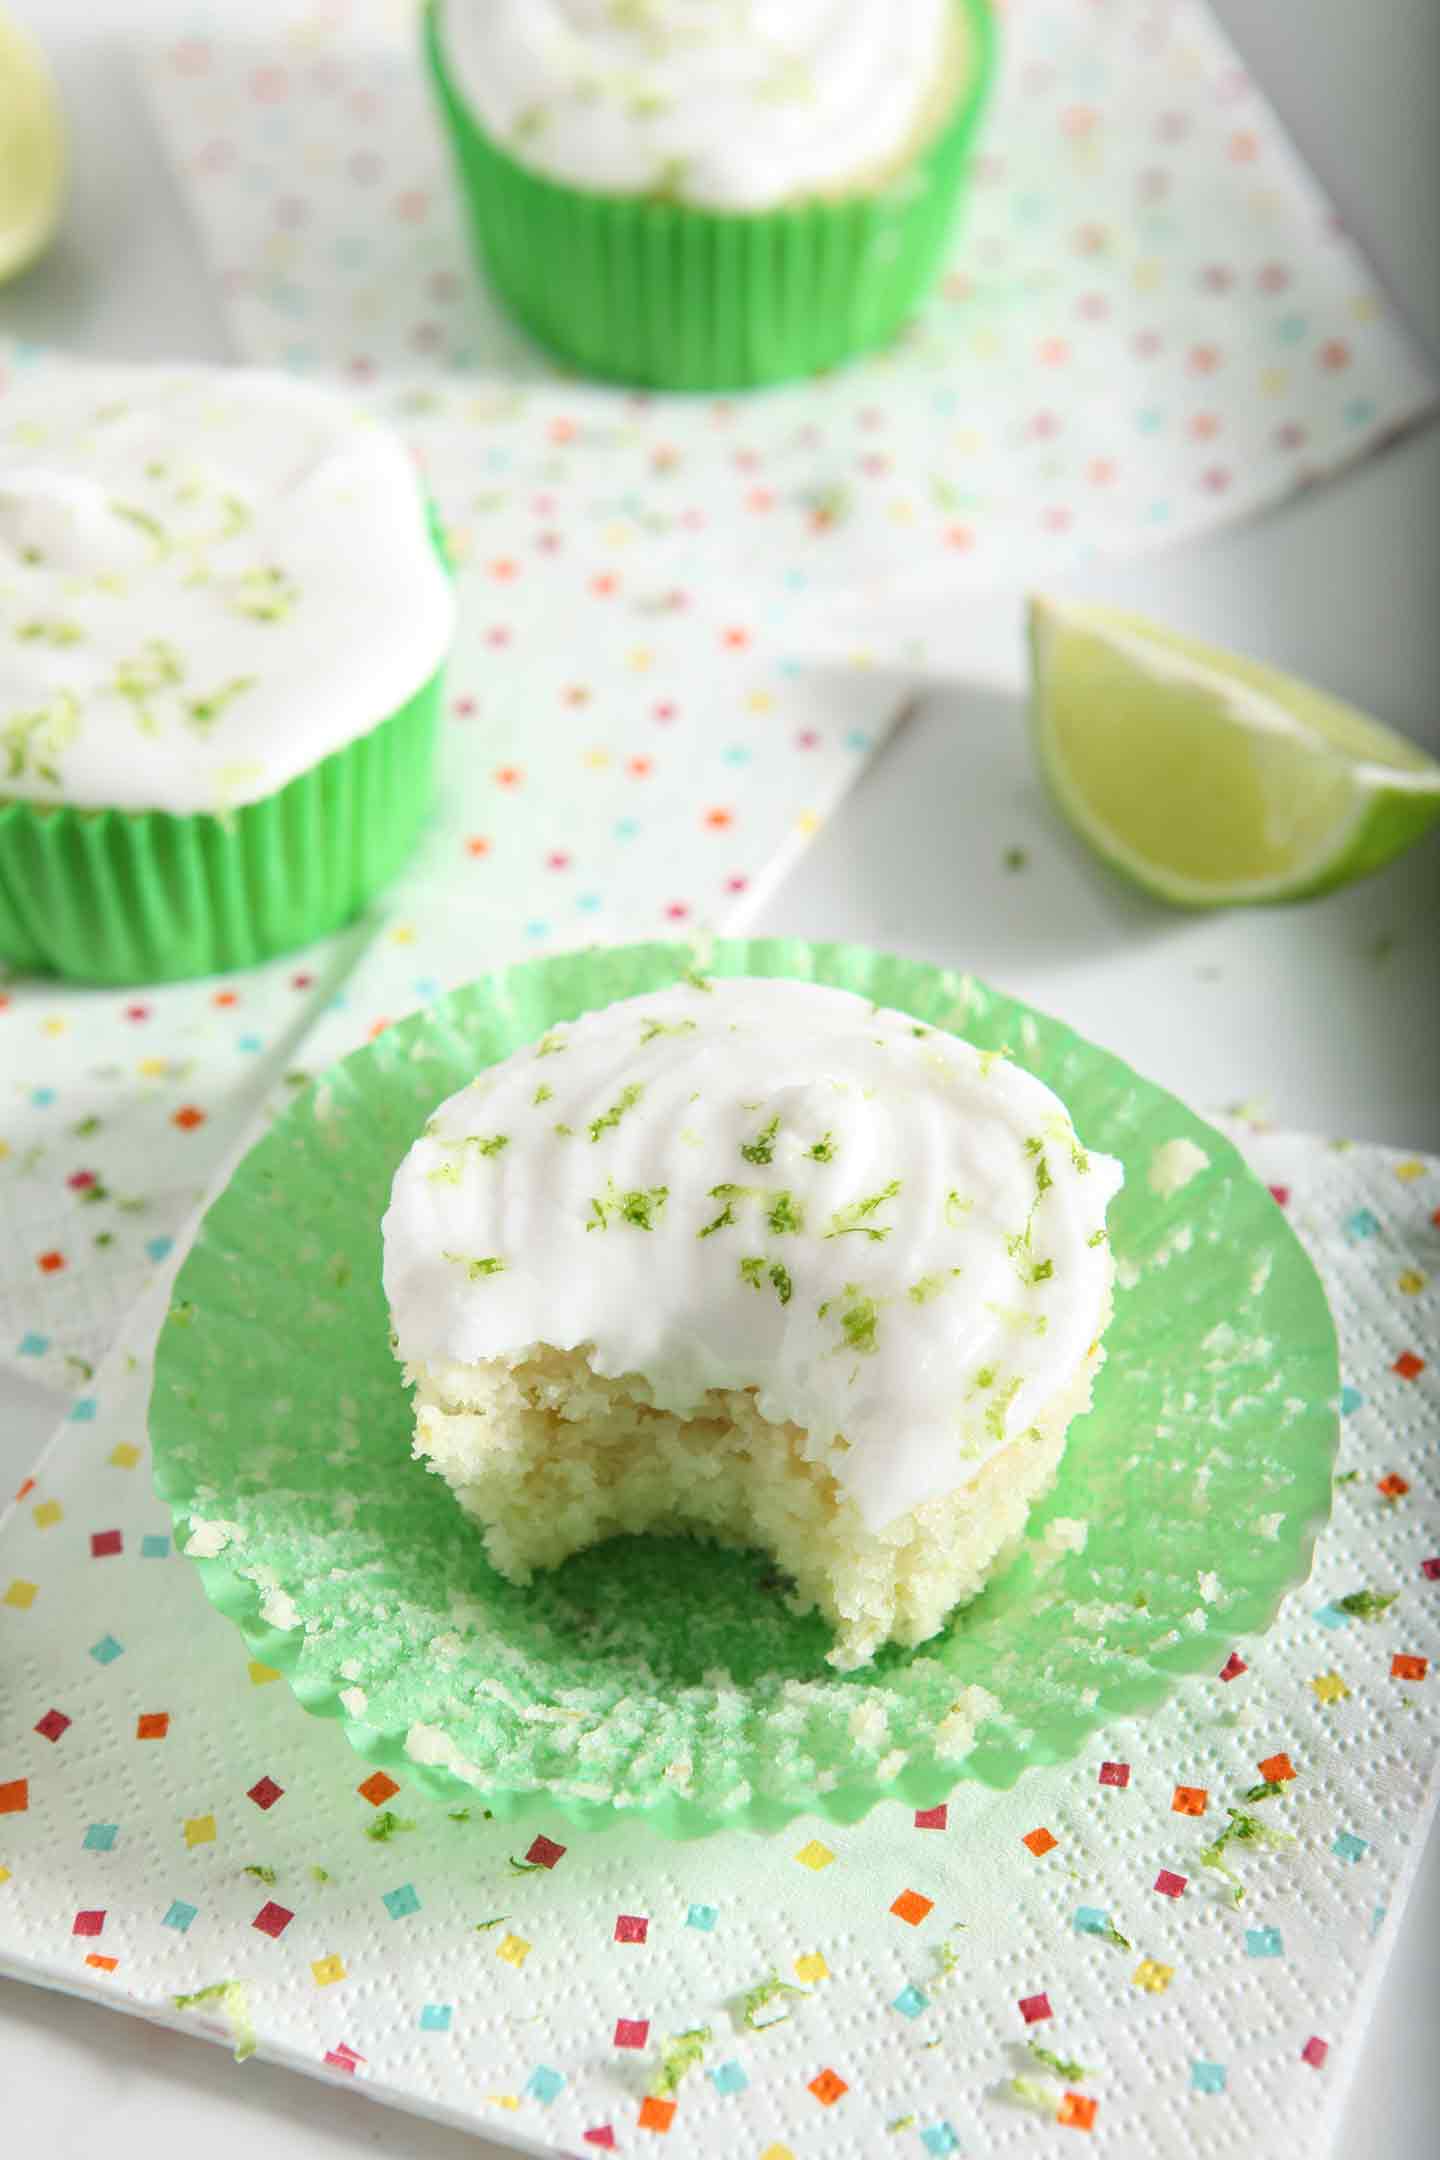 DIY Margarita cupcakes with salted tequila (via https:)